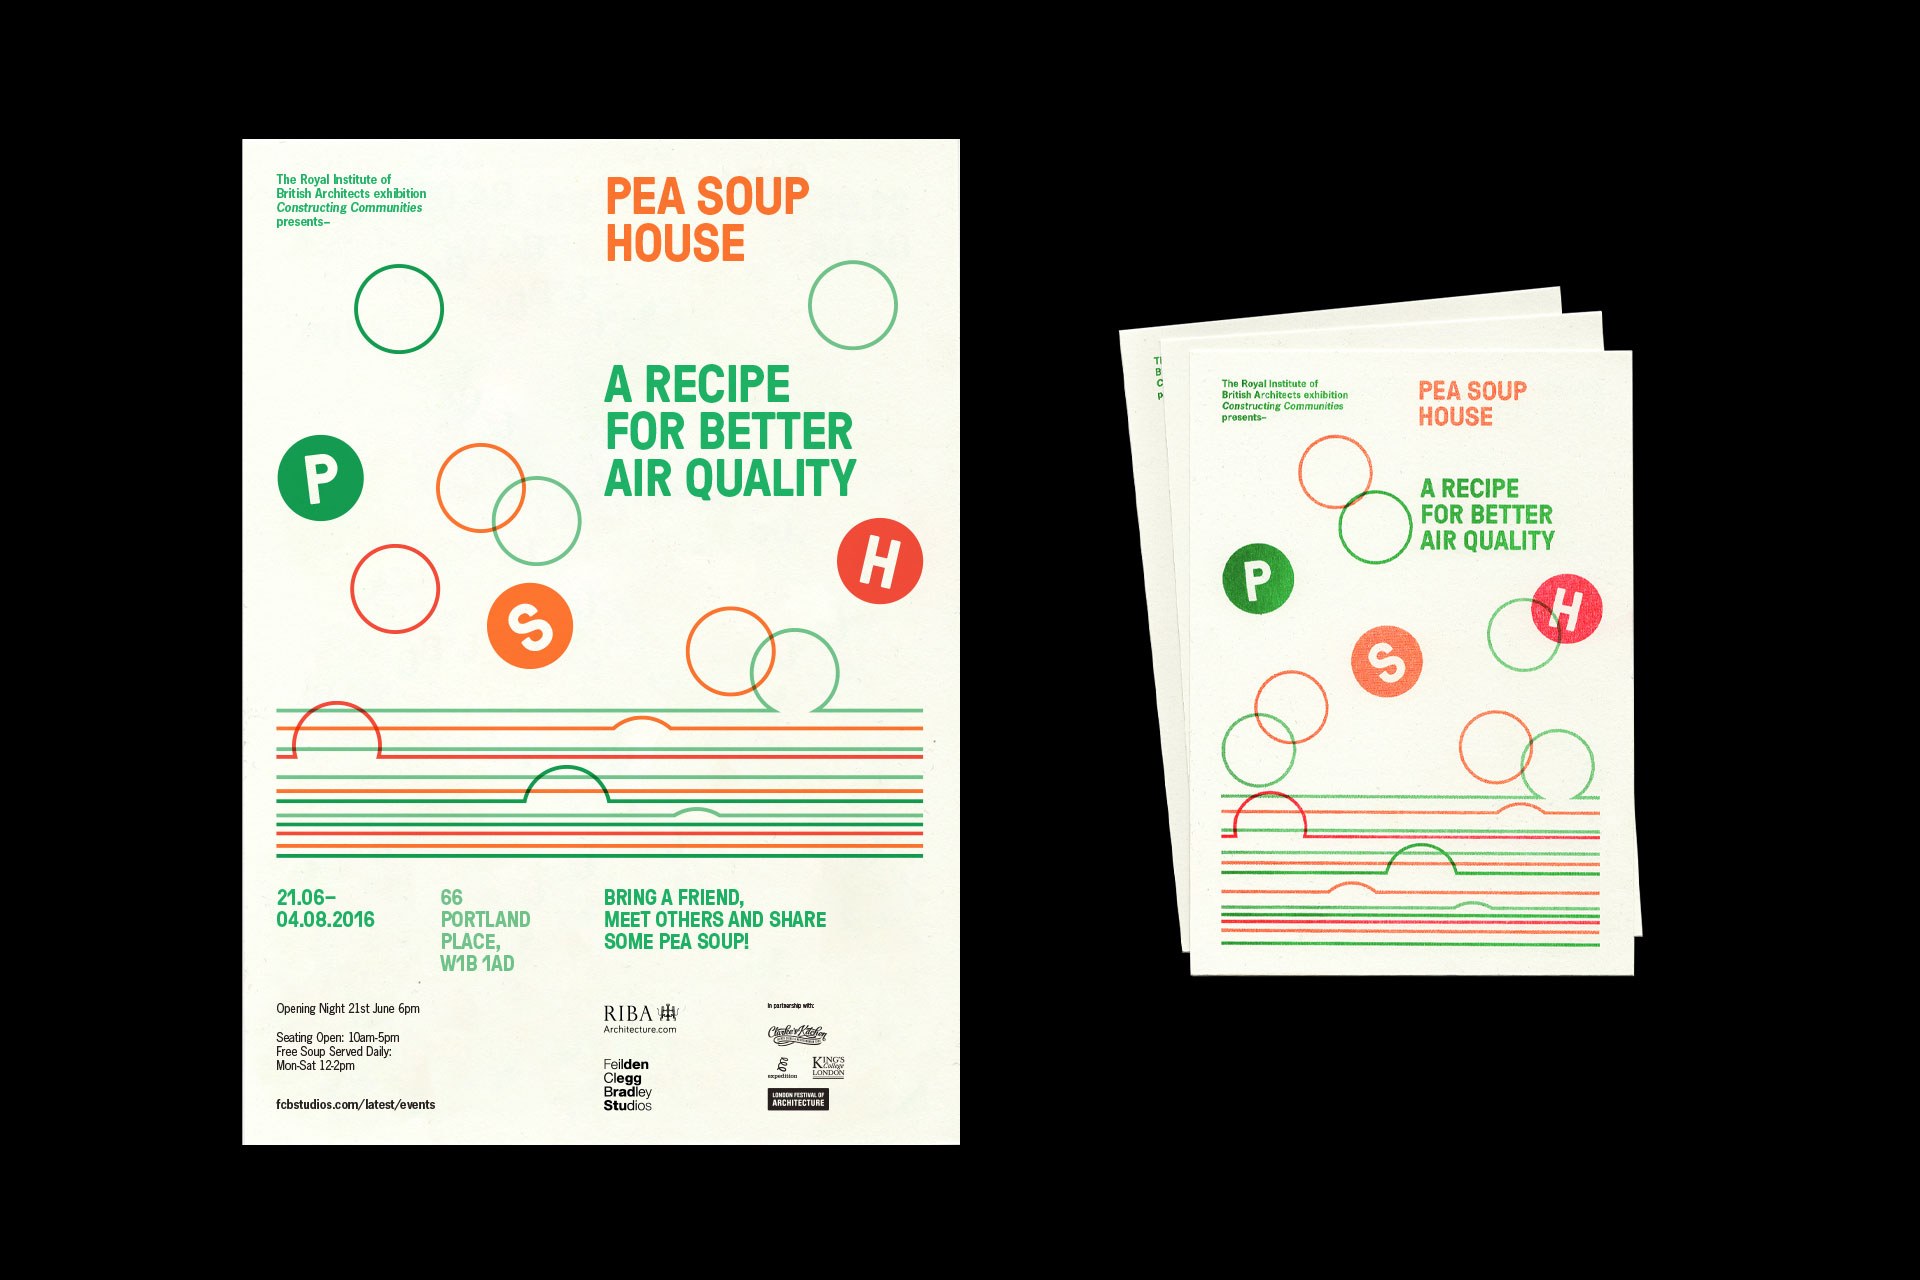 Poster and flyers for the Pea Soup House installation at the RIBA London.